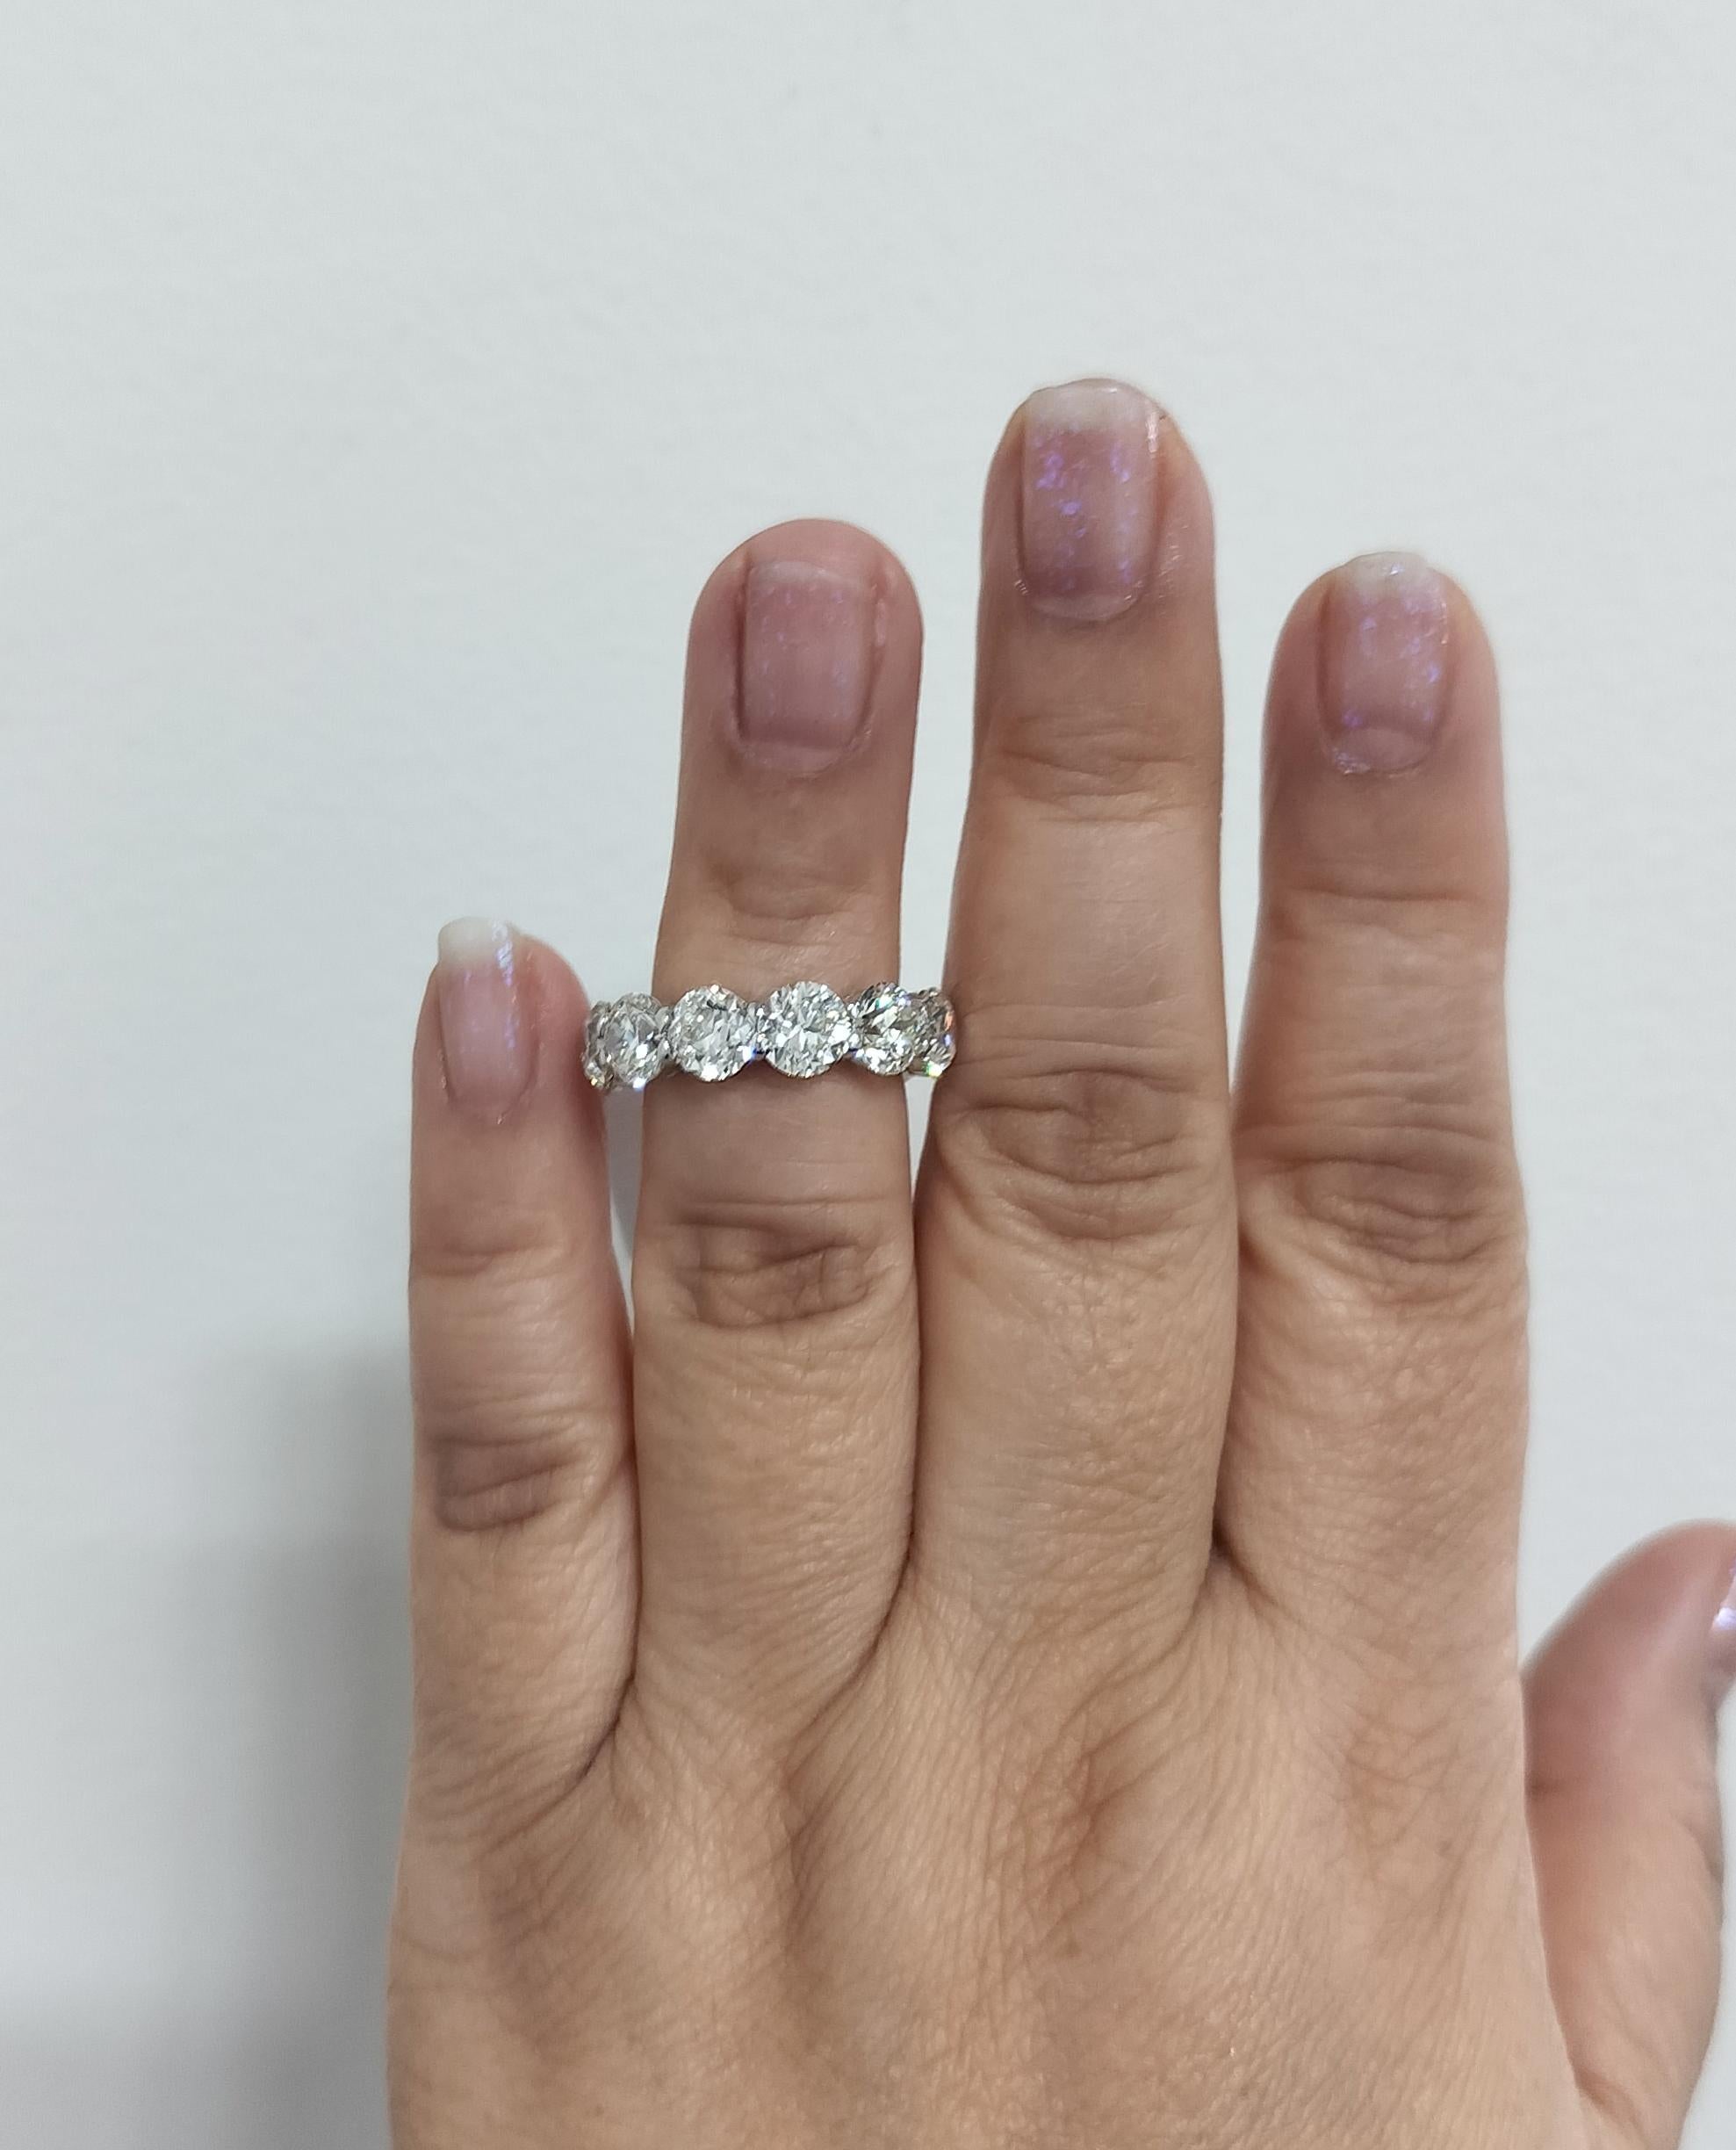 Gorgeous 10.85 ct. white diamond rounds JK color VS1-SI1 clarity.  Total of 12 stones.  Handmade in 18k white gold.  Ring size 6.5.  All stones have GIA certificates.